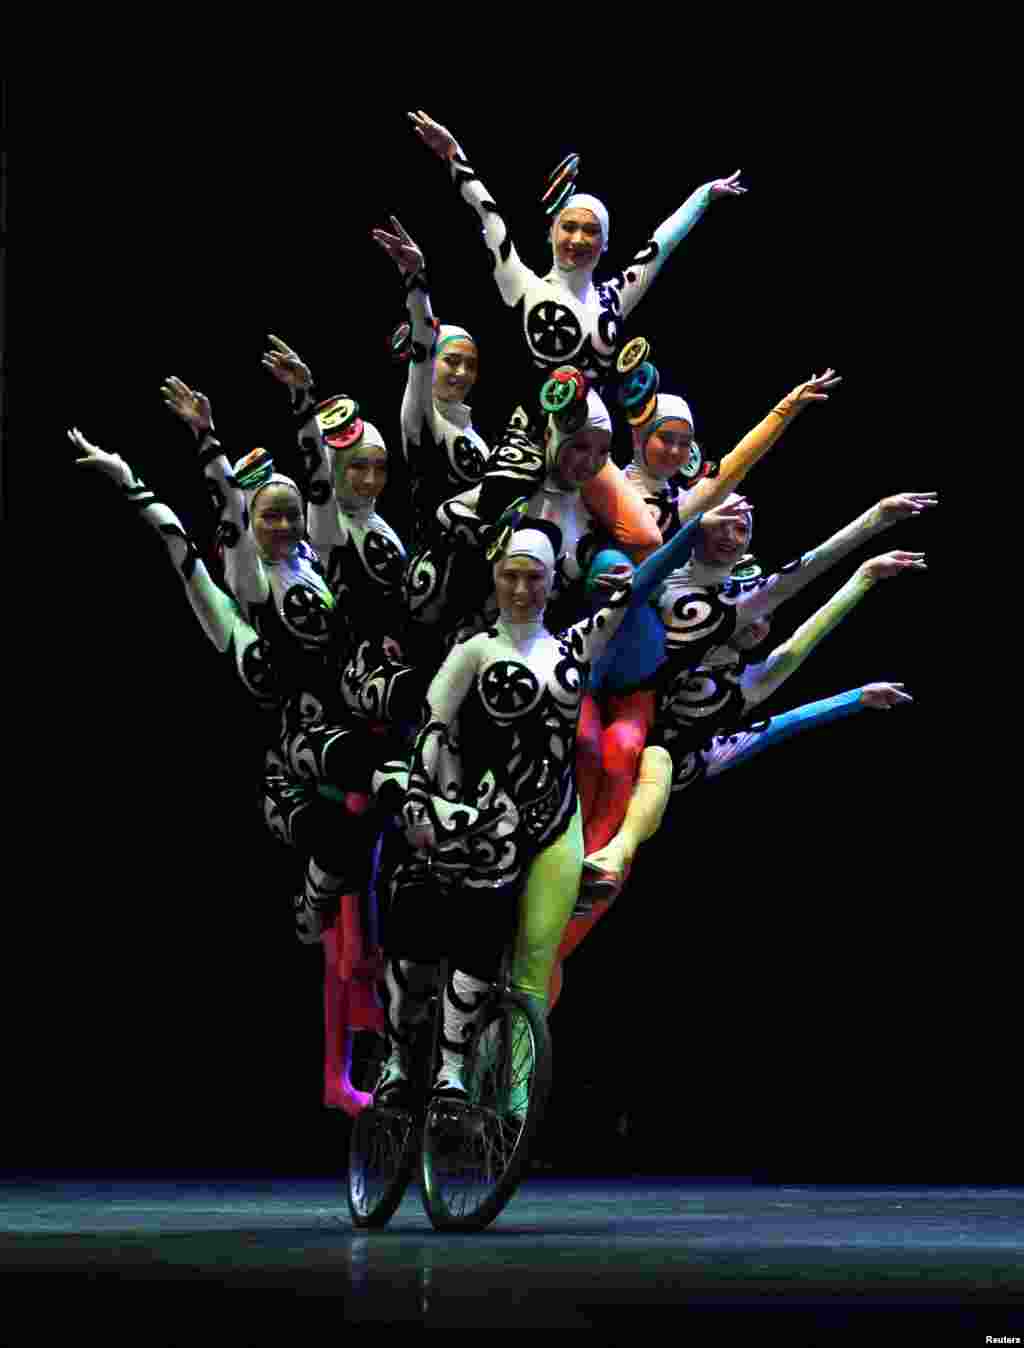 The China National Acrobatic Troupe performs at the Spring of Culture concert in Manama, Bahrain.